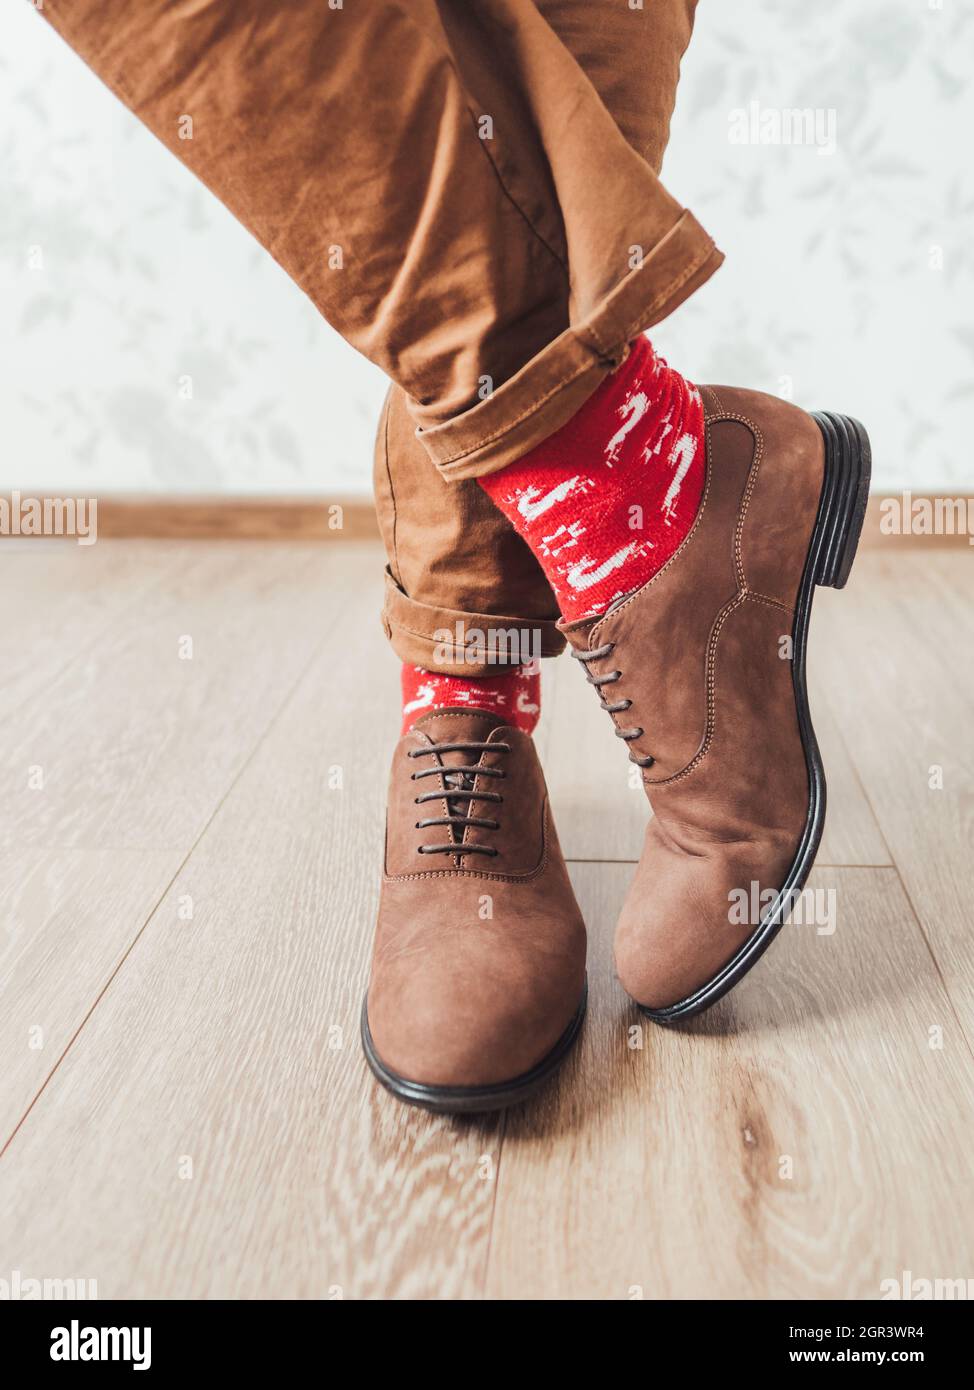 Young Man In Chinos Trousers, Red Socks With Reindeers. Scandinavian  Pattern. Winter Casual Outfit Stock Photo - Alamy